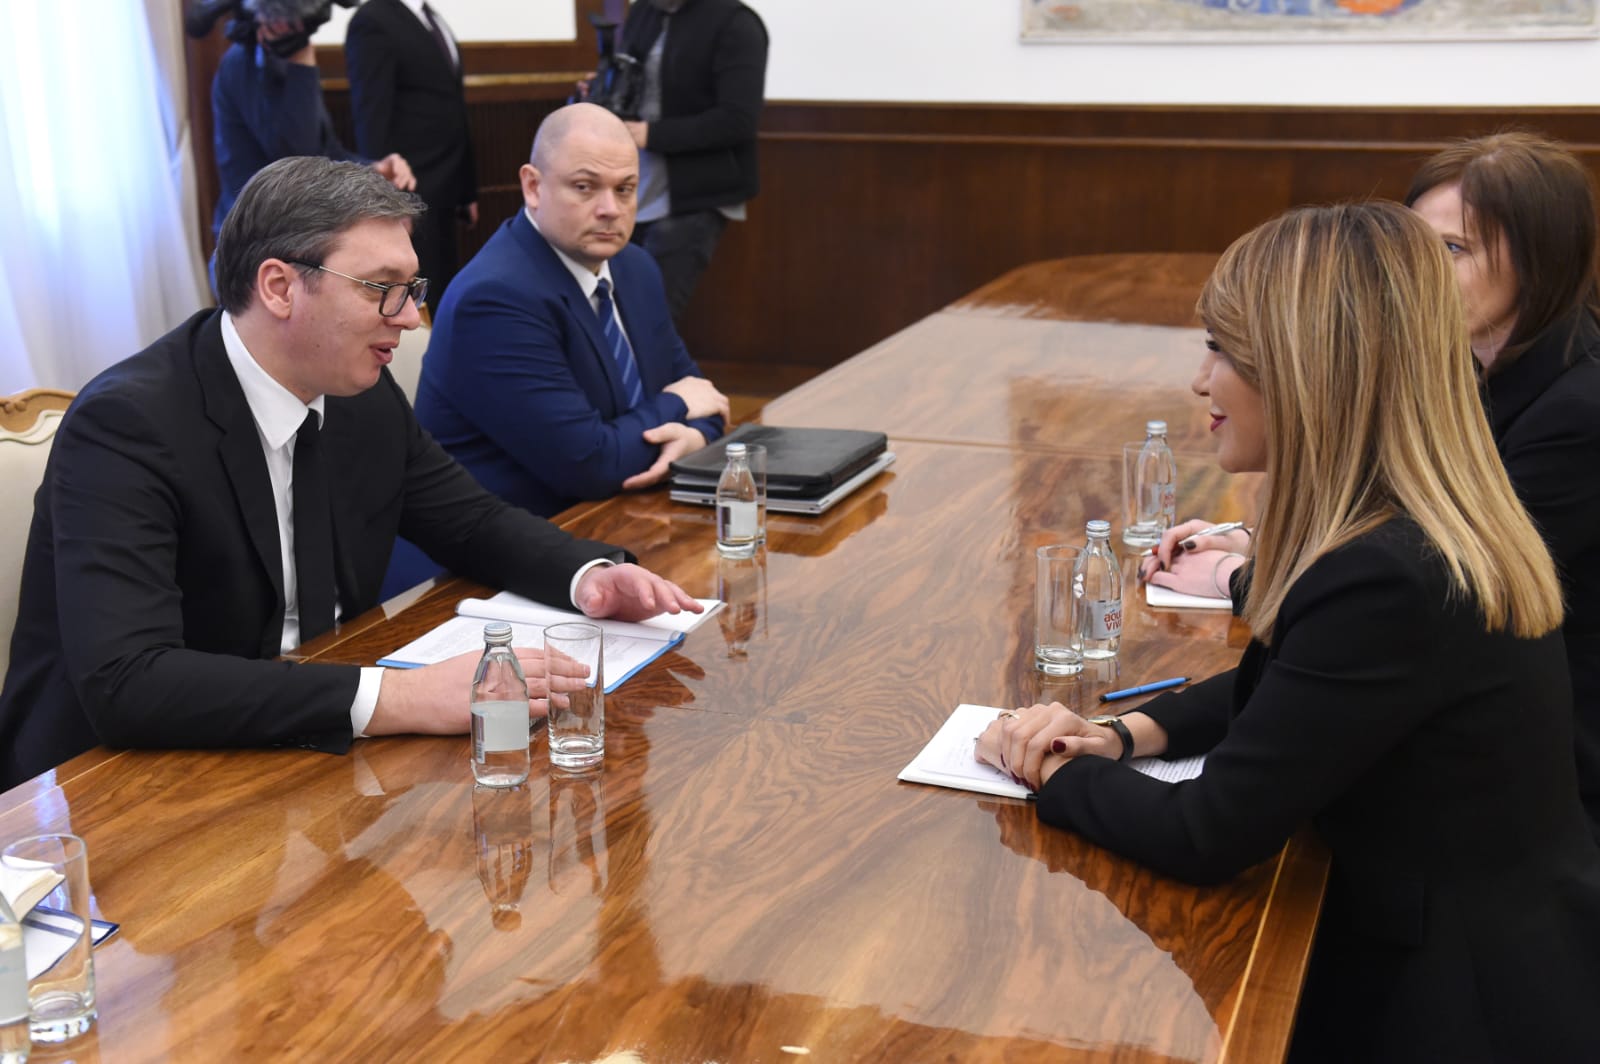 Secretary General of the Regional Cooperation Council (RCC), Majlinda Bregu met with the President of Serbia, Aleksandar Vučić in Belgrade on 4 February 2019 (Photo:  Courtesy of the Office of the President of Republic of Serbia)